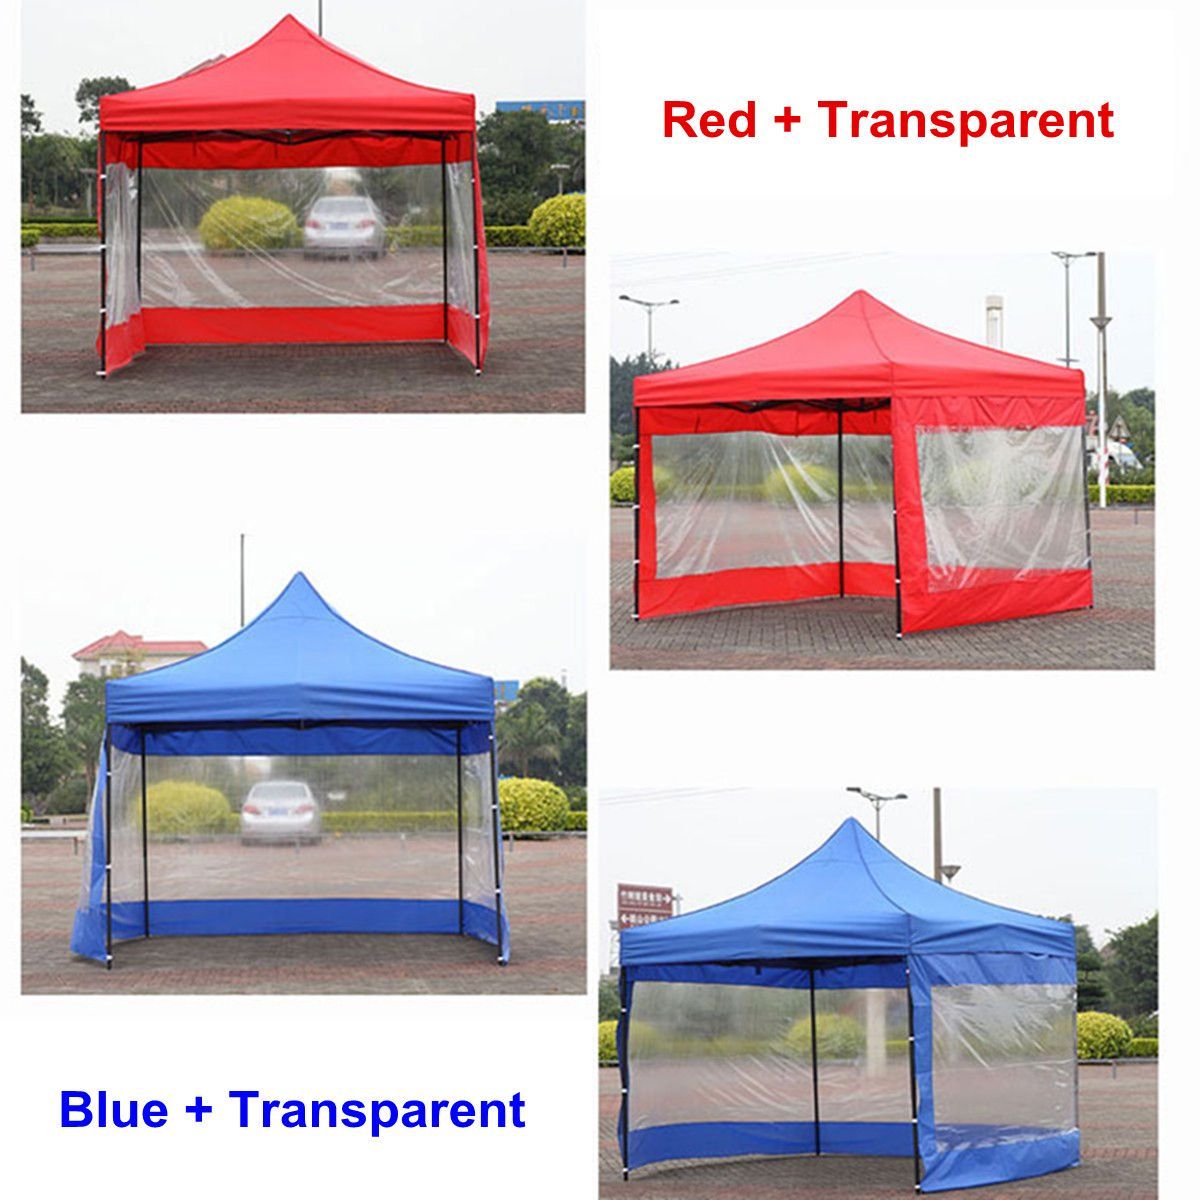 68m-SunShade-Side-Walls-Screen-Panel-Gazebo-Canopy-Shelters-for-2x2x2m-Tent-1634213